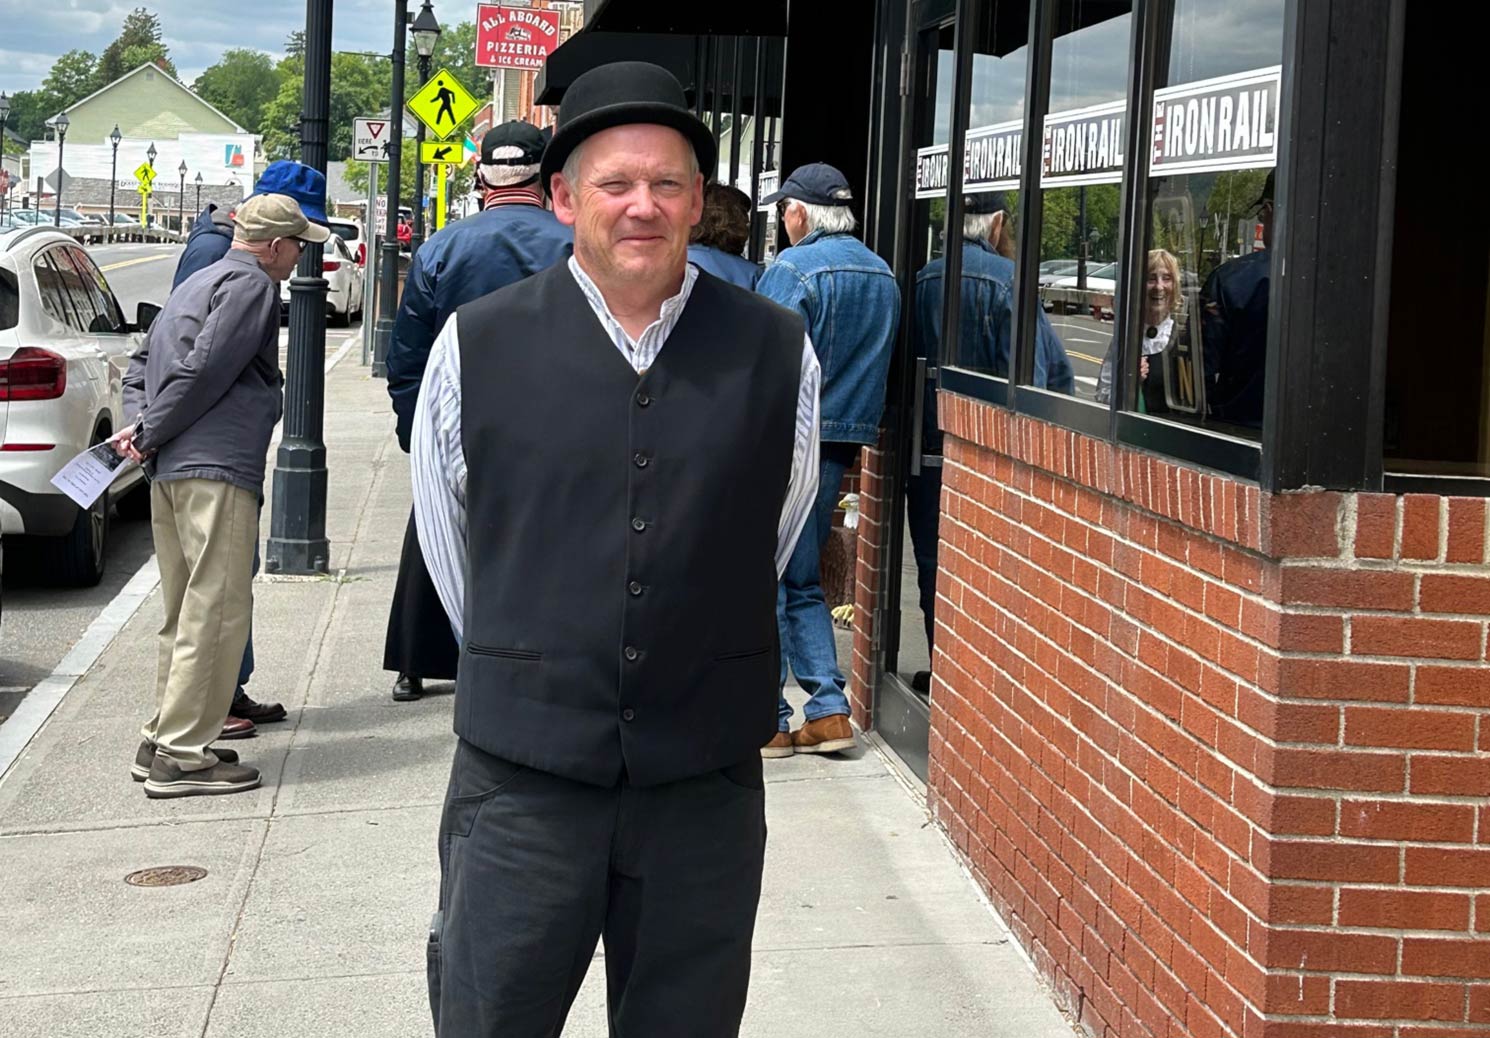  Thank you to all who had a part in our newest event. Board member, Joe Cats, was instrumental in organizing the Historical walk depicting the Great Fire of 1902